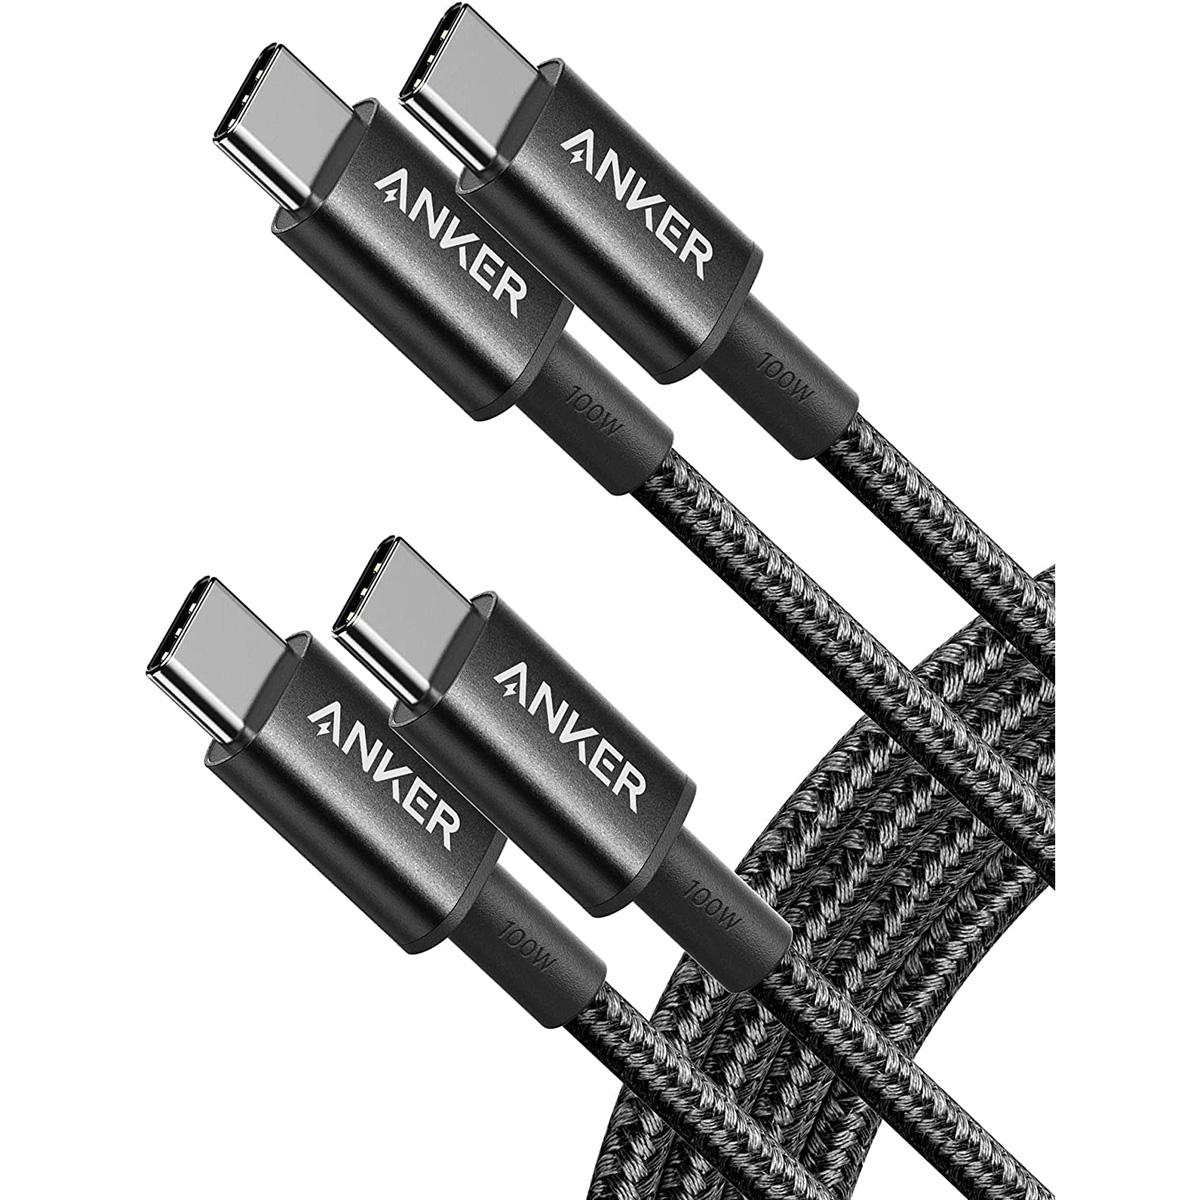 Anker 333 100W 6ft USB C to USB C Cables 2 Pack for $14.99